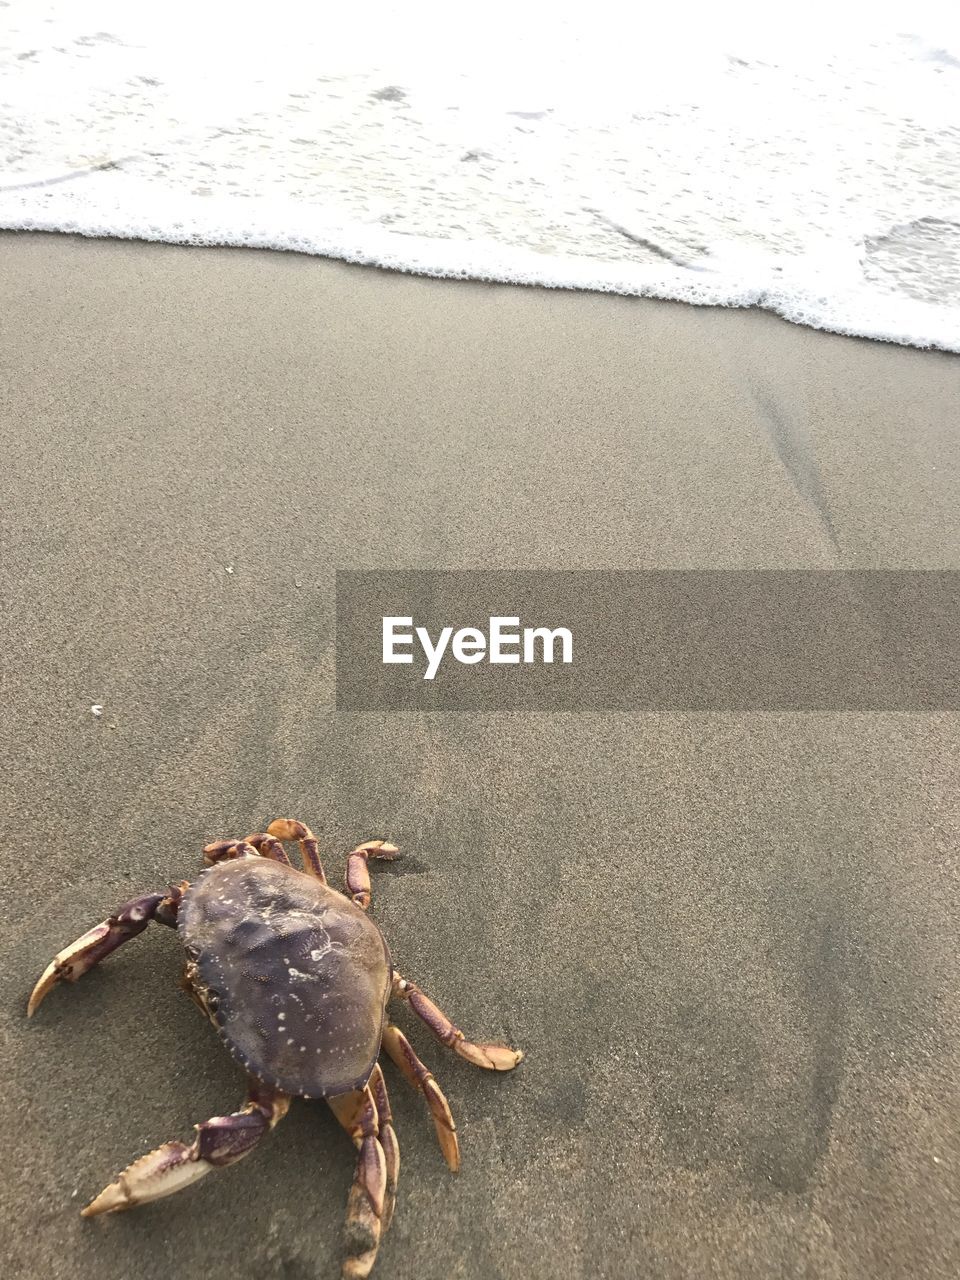 CLOSE-UP OF CRAB ON SAND AT BEACH